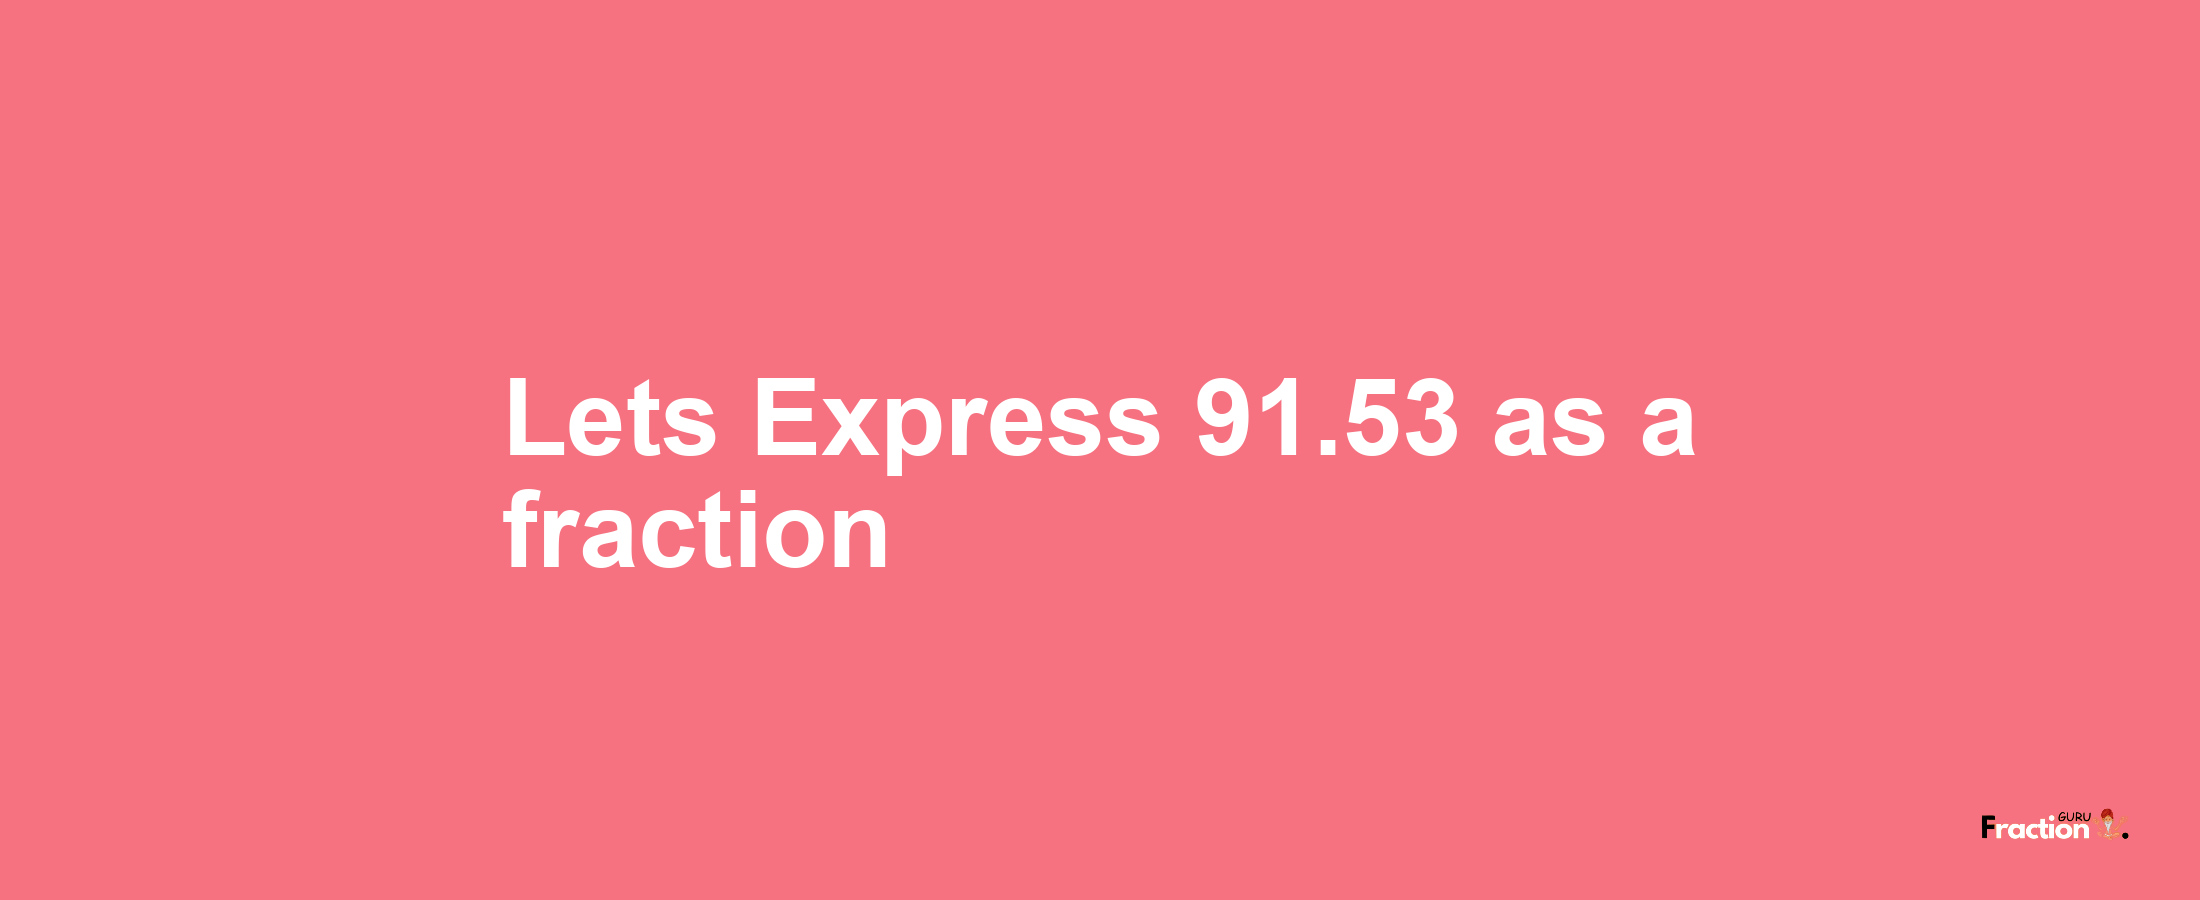 Lets Express 91.53 as afraction